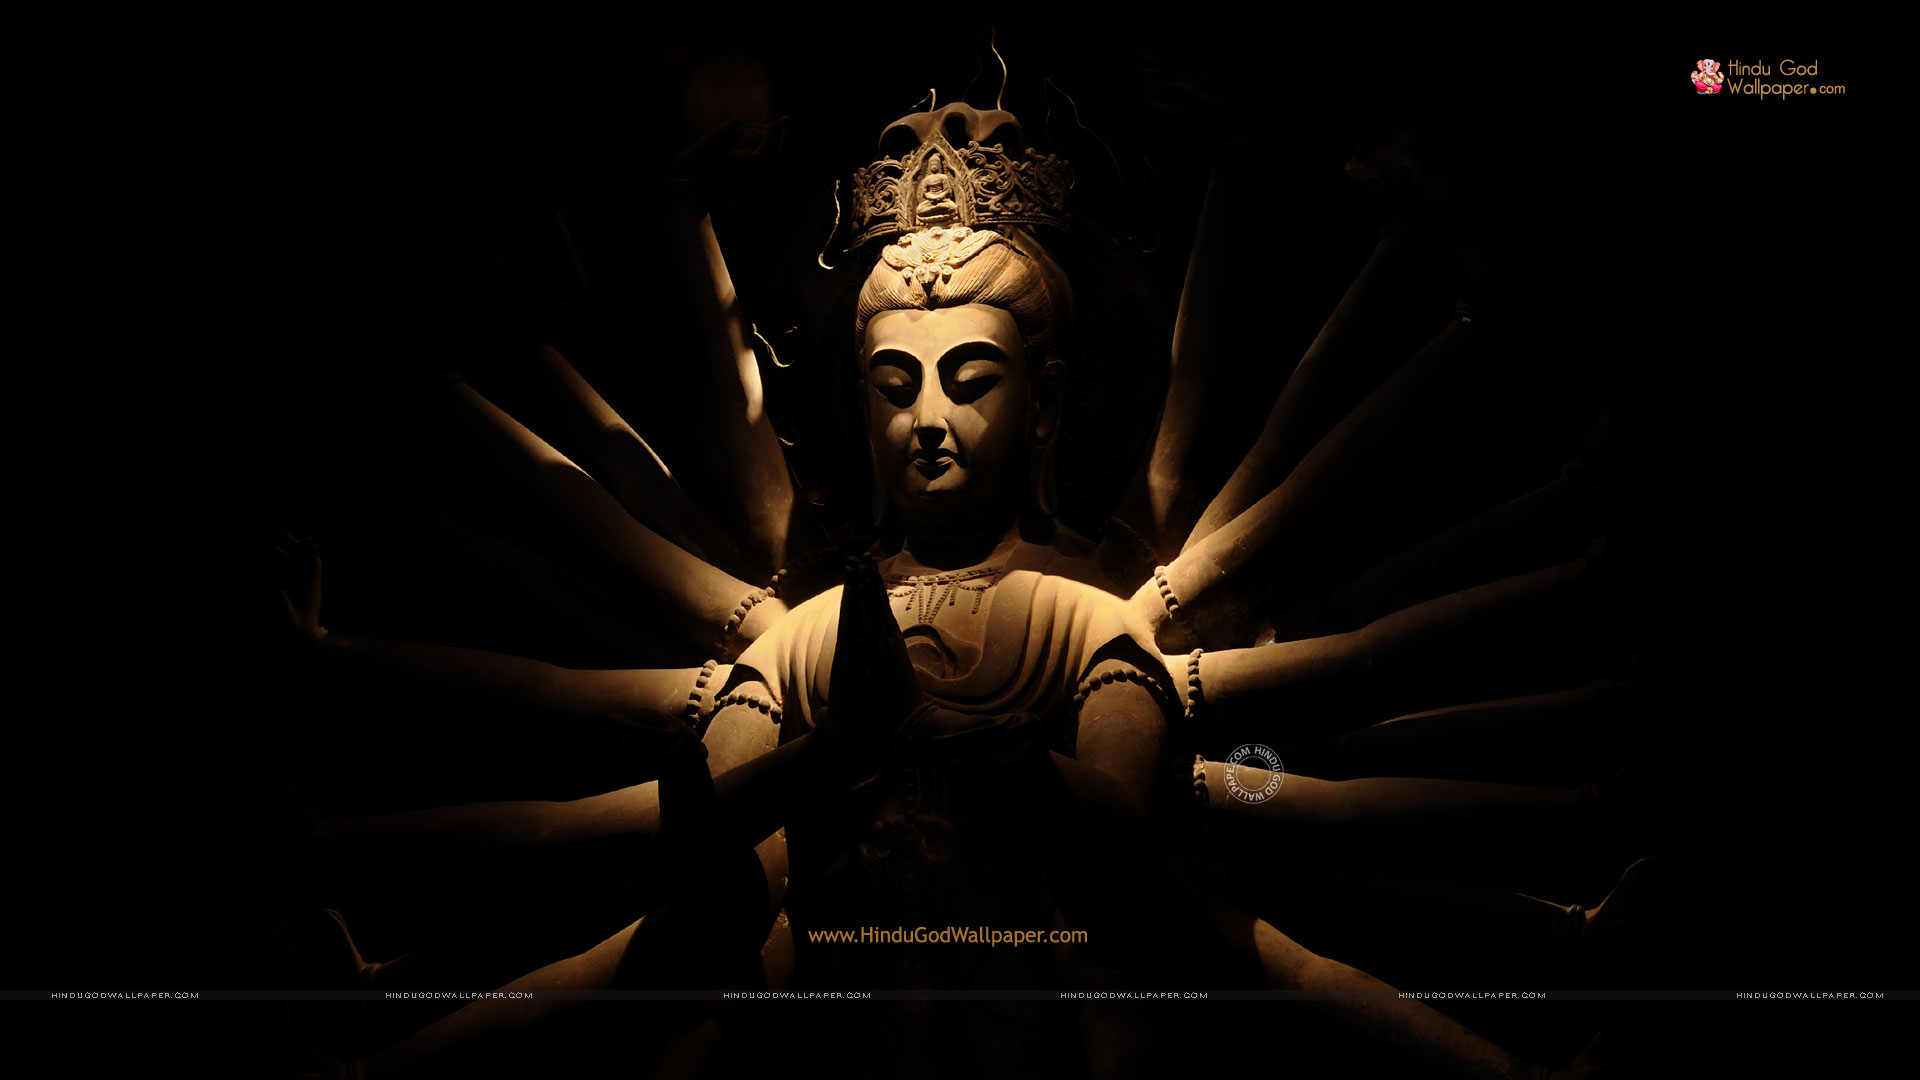 Buddha Wallpapers HD 1080p Full Size Widescreen Download